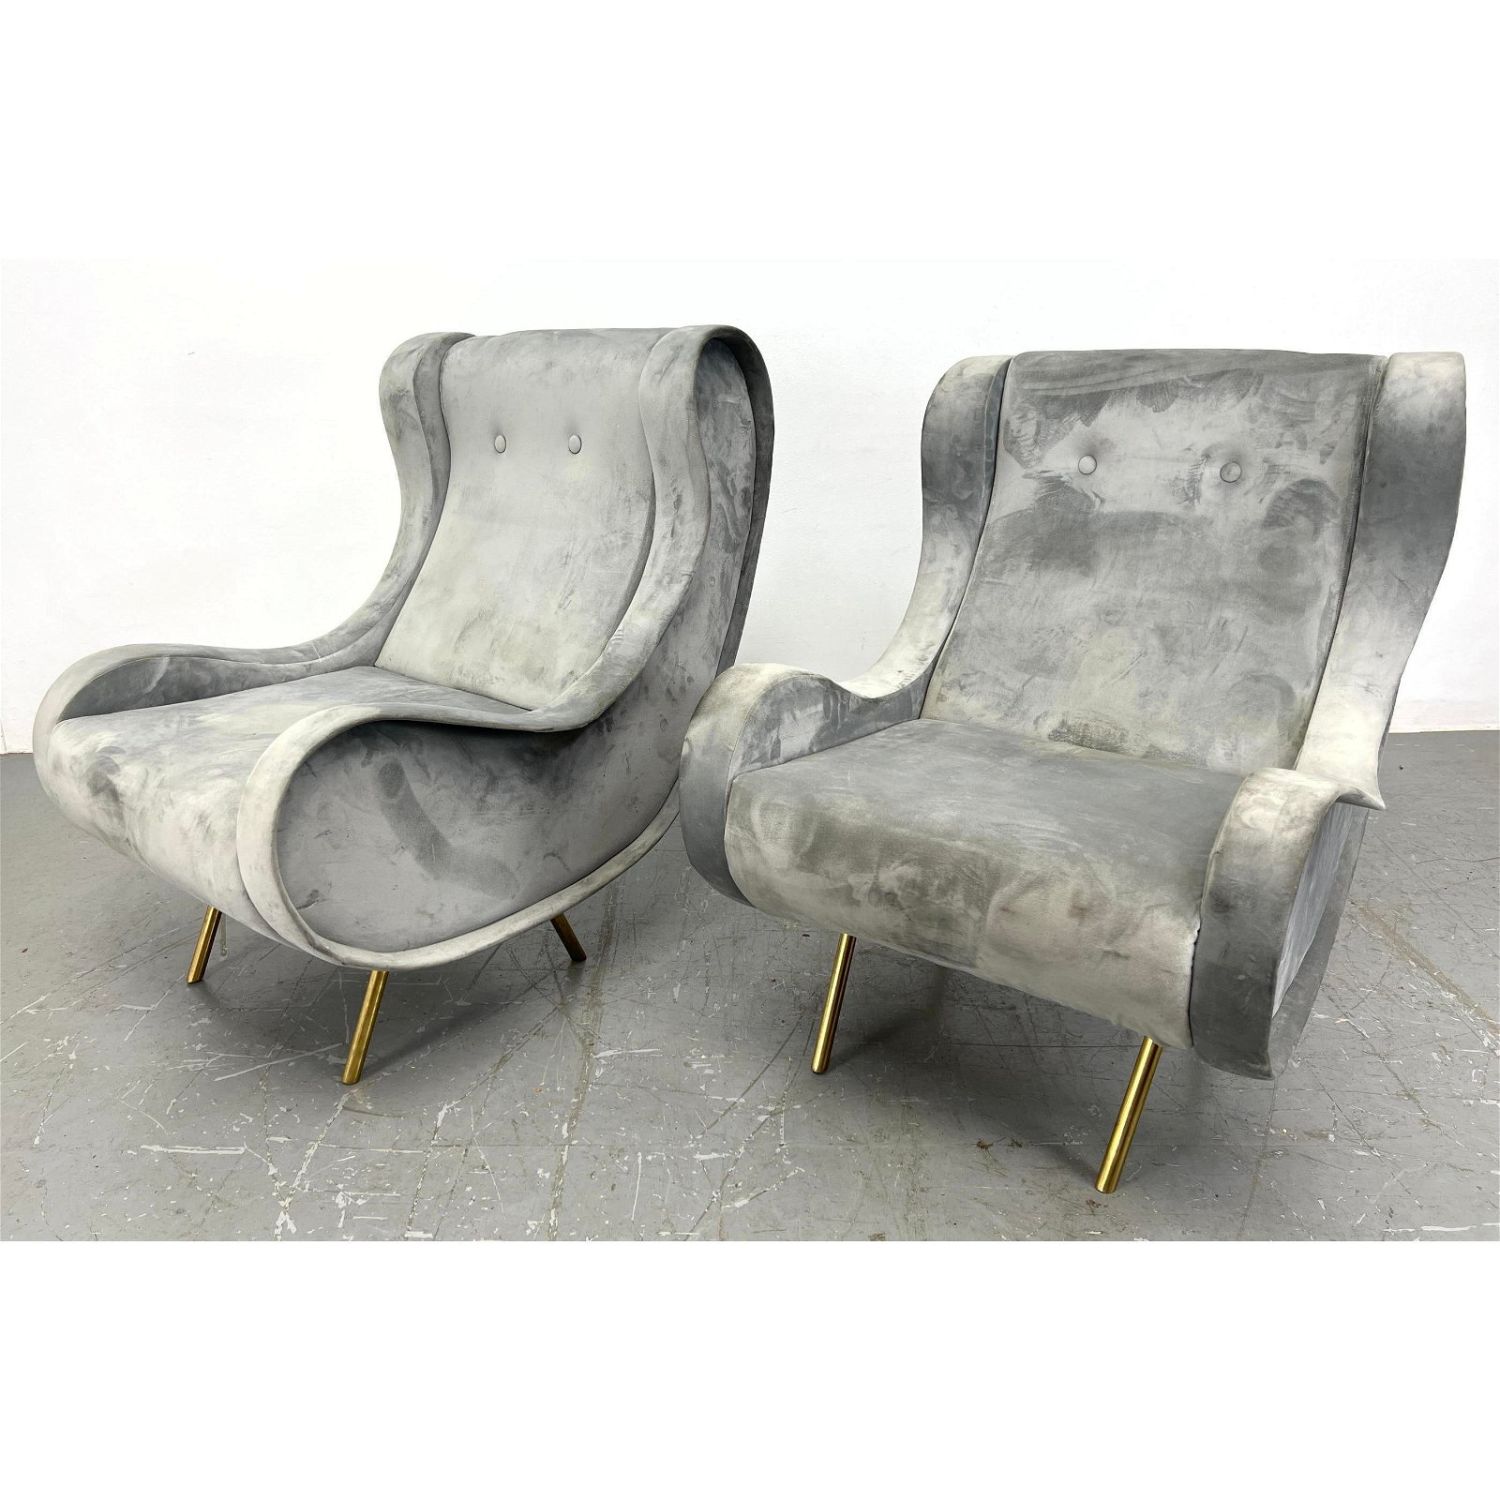 Pair Marco Zanuso Style Lady Chairs.